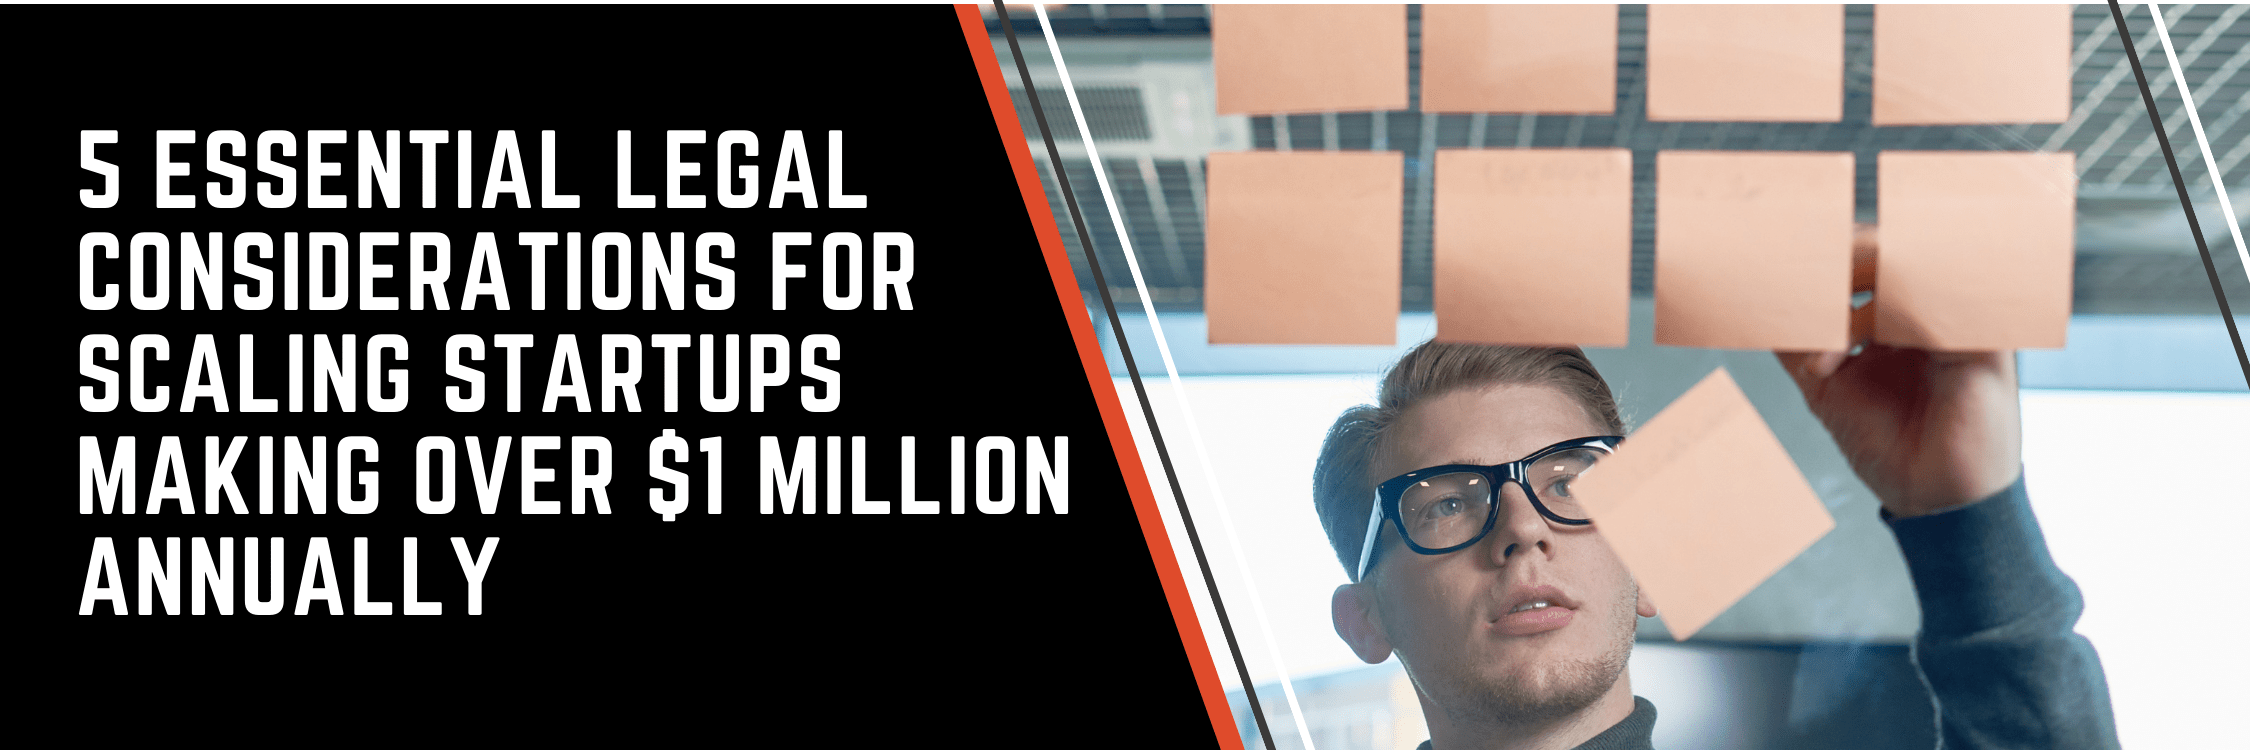 5 Essential Legal Considerations For Scaling Startups Making Over 1 Million Annually